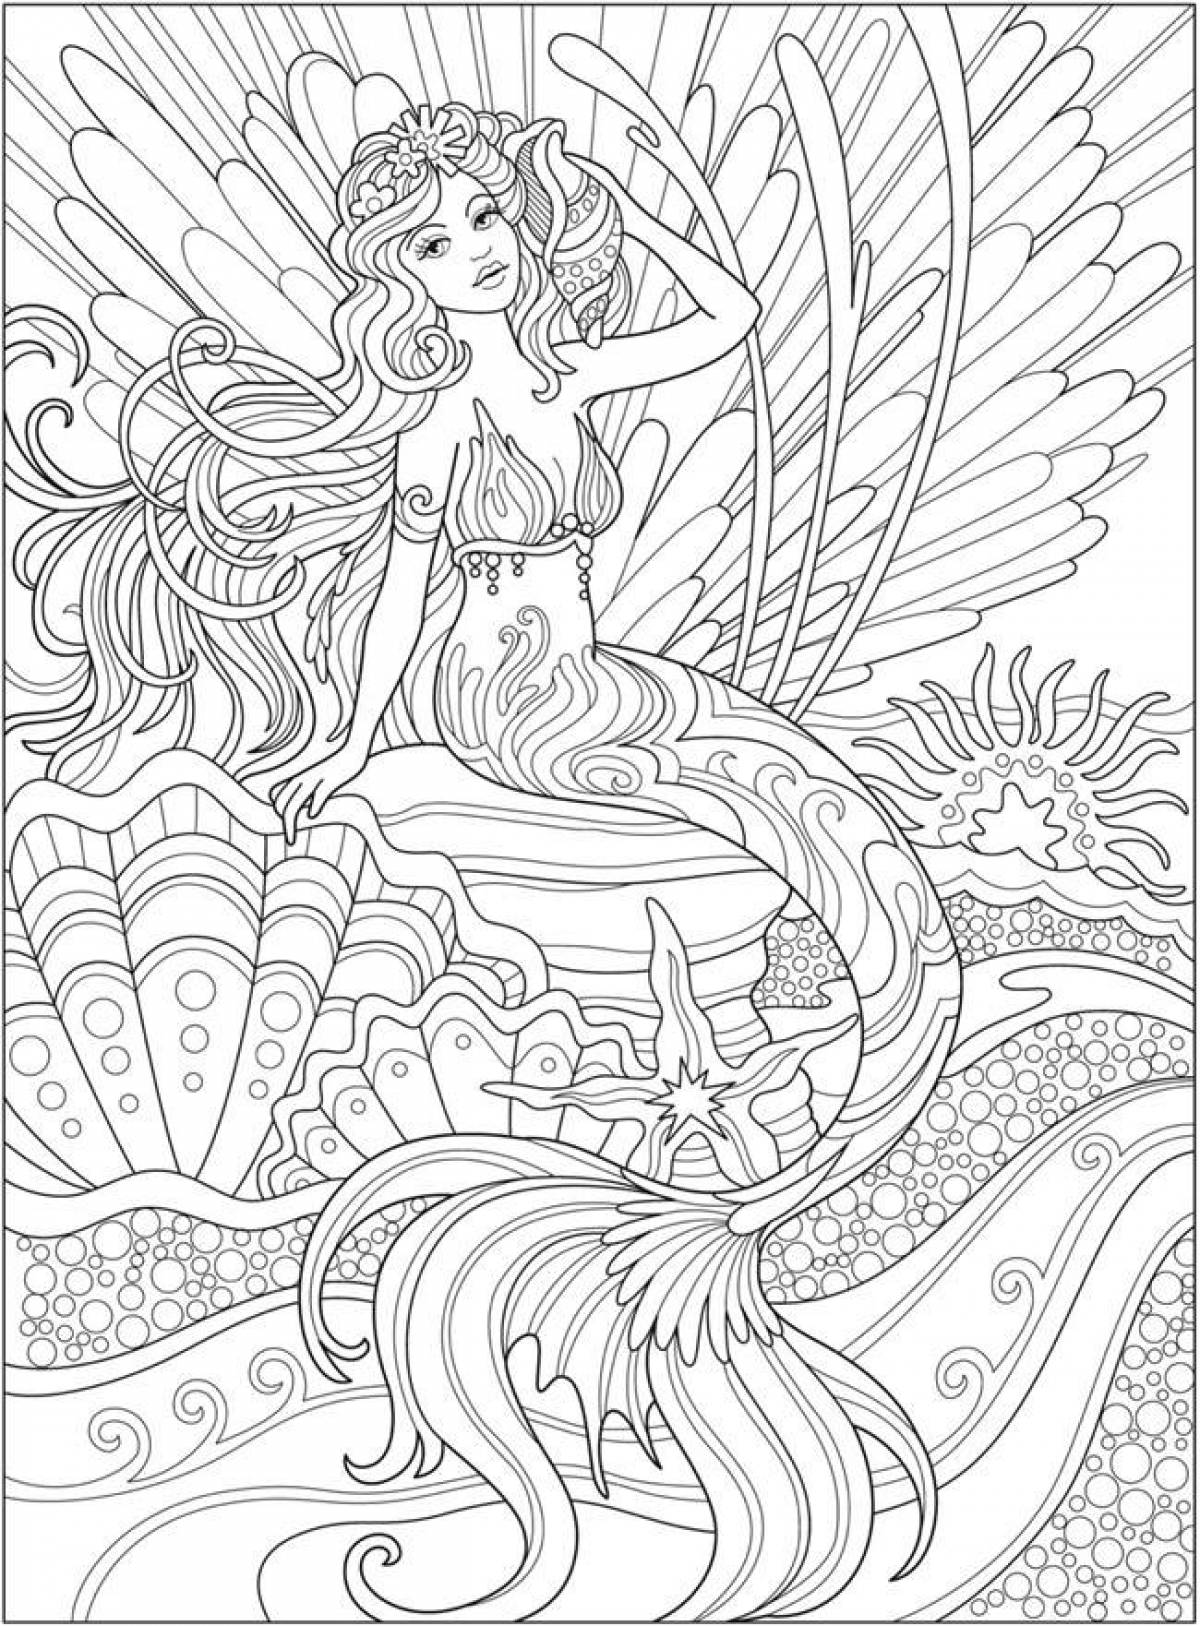 New 2020 coloring page: awesome and vibrant